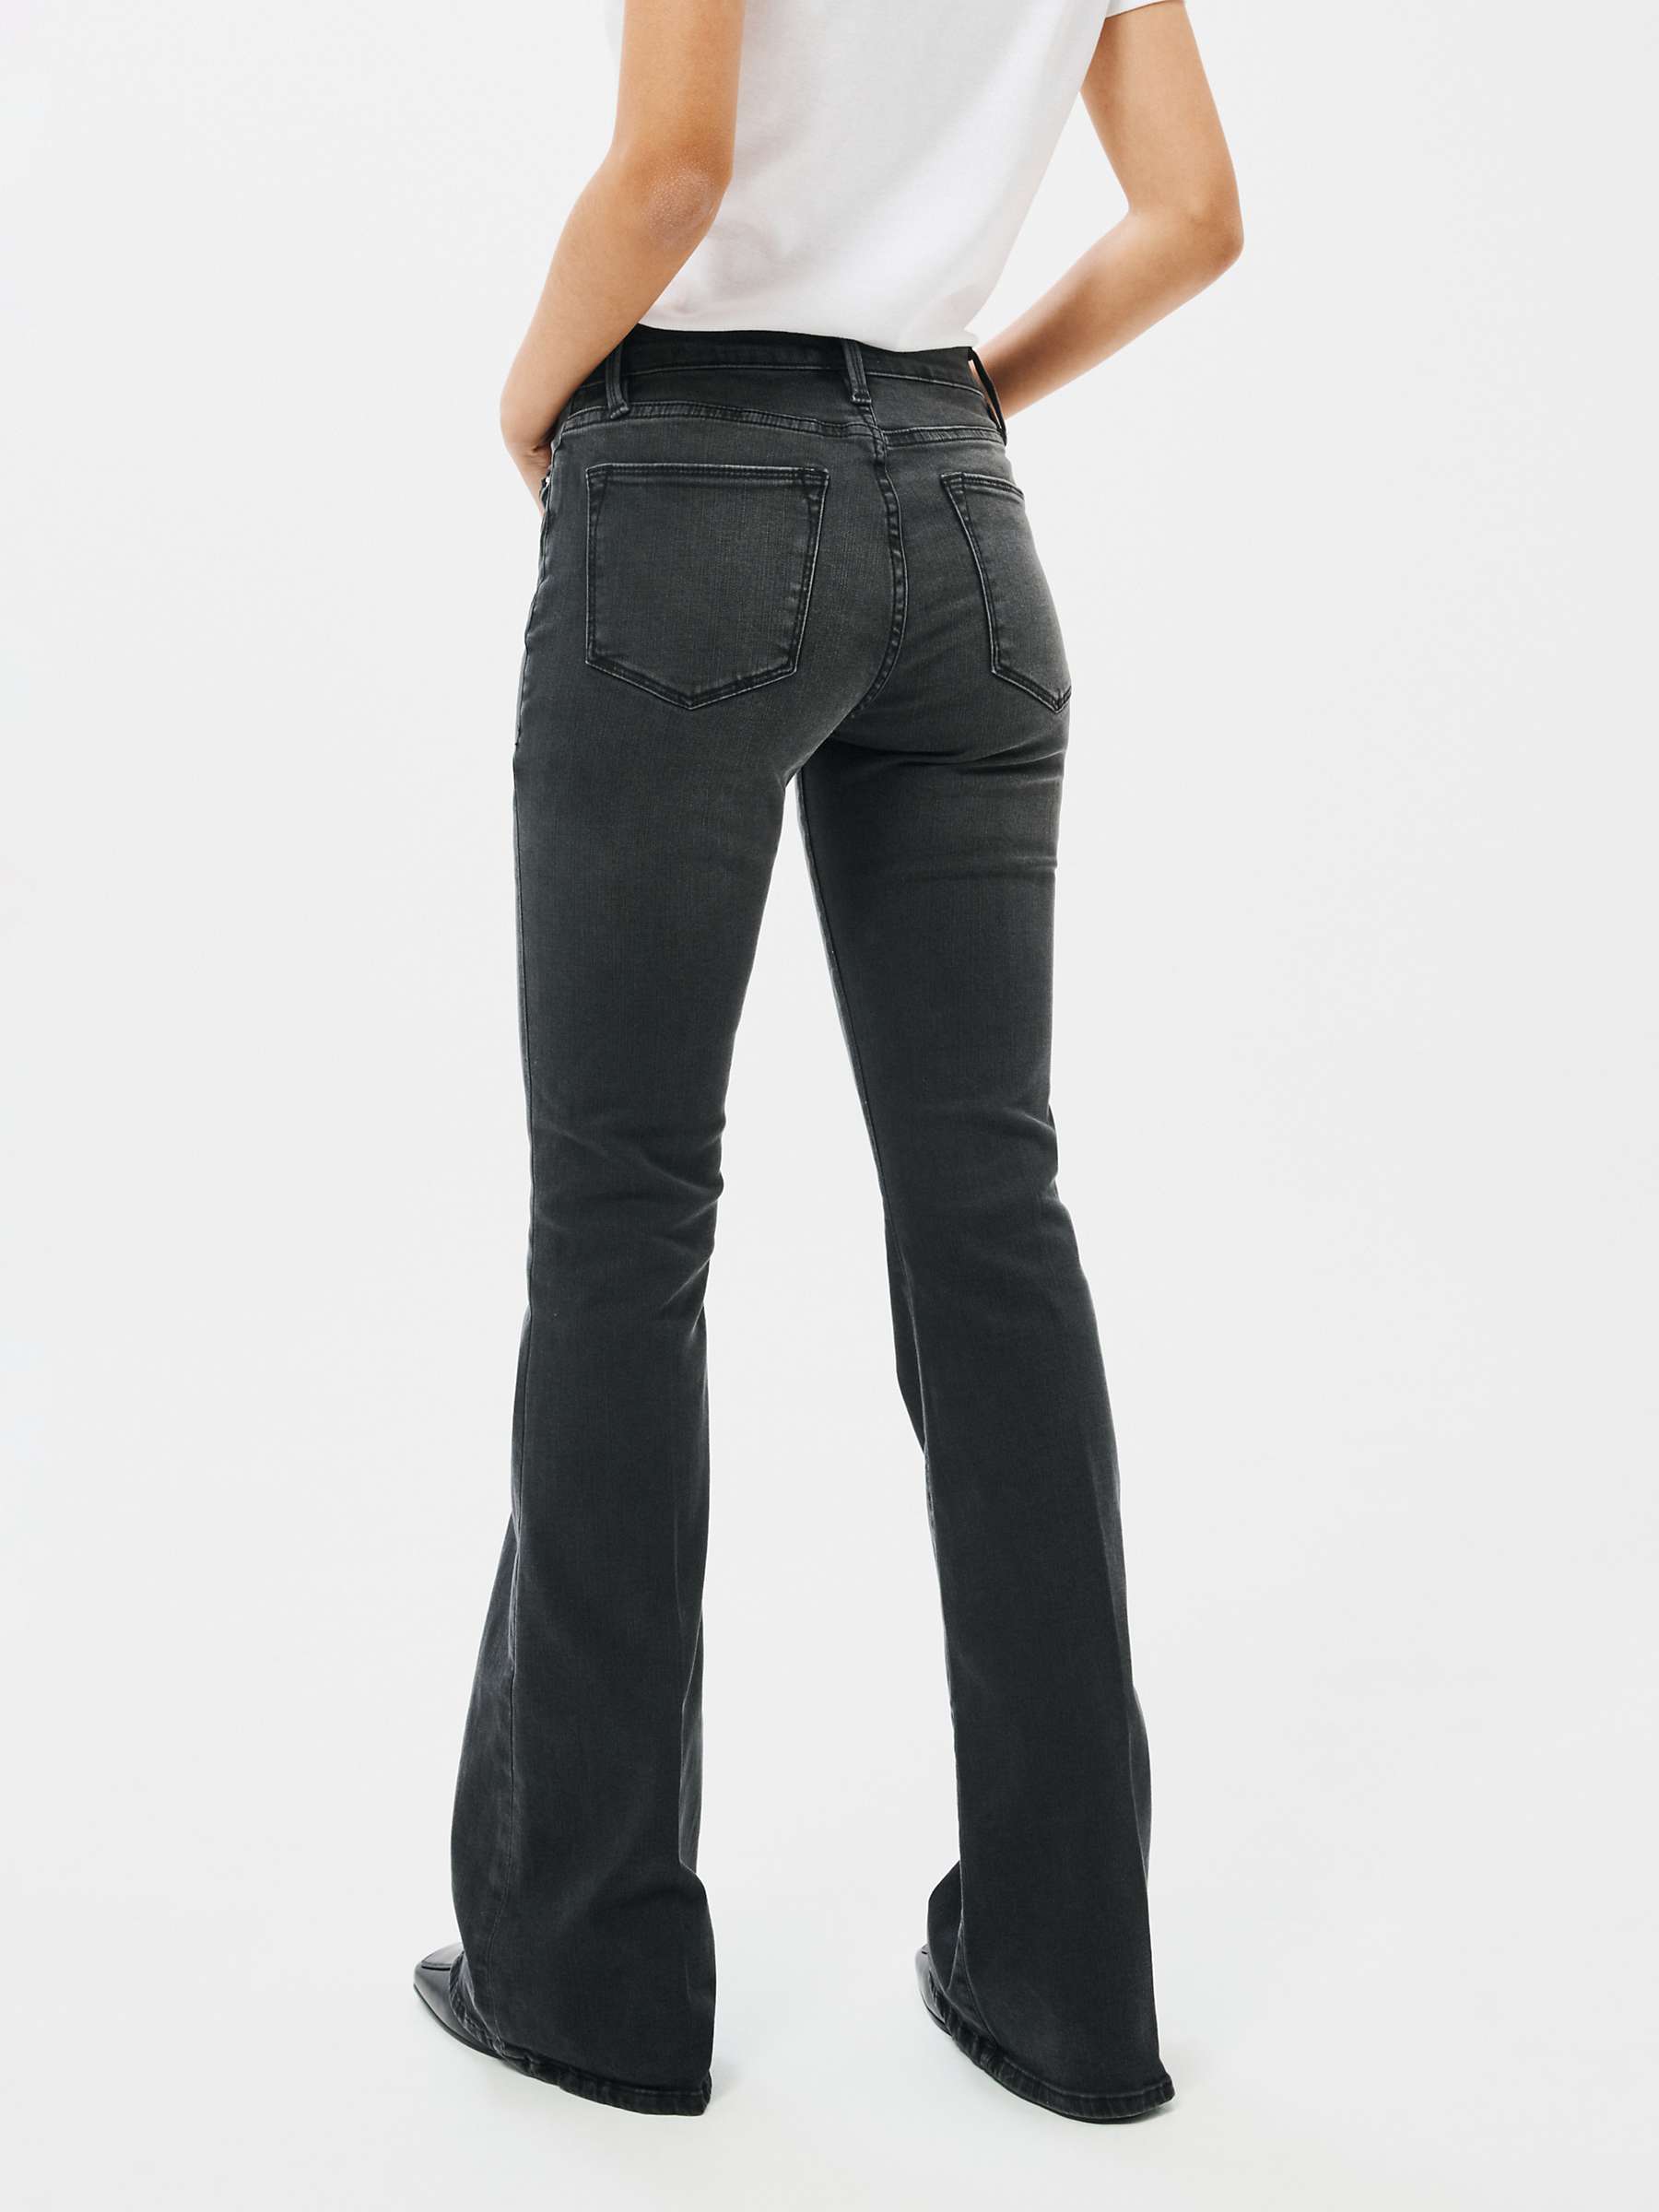 FRAME Le High Flared Jeans, Mardel at John Lewis & Partners